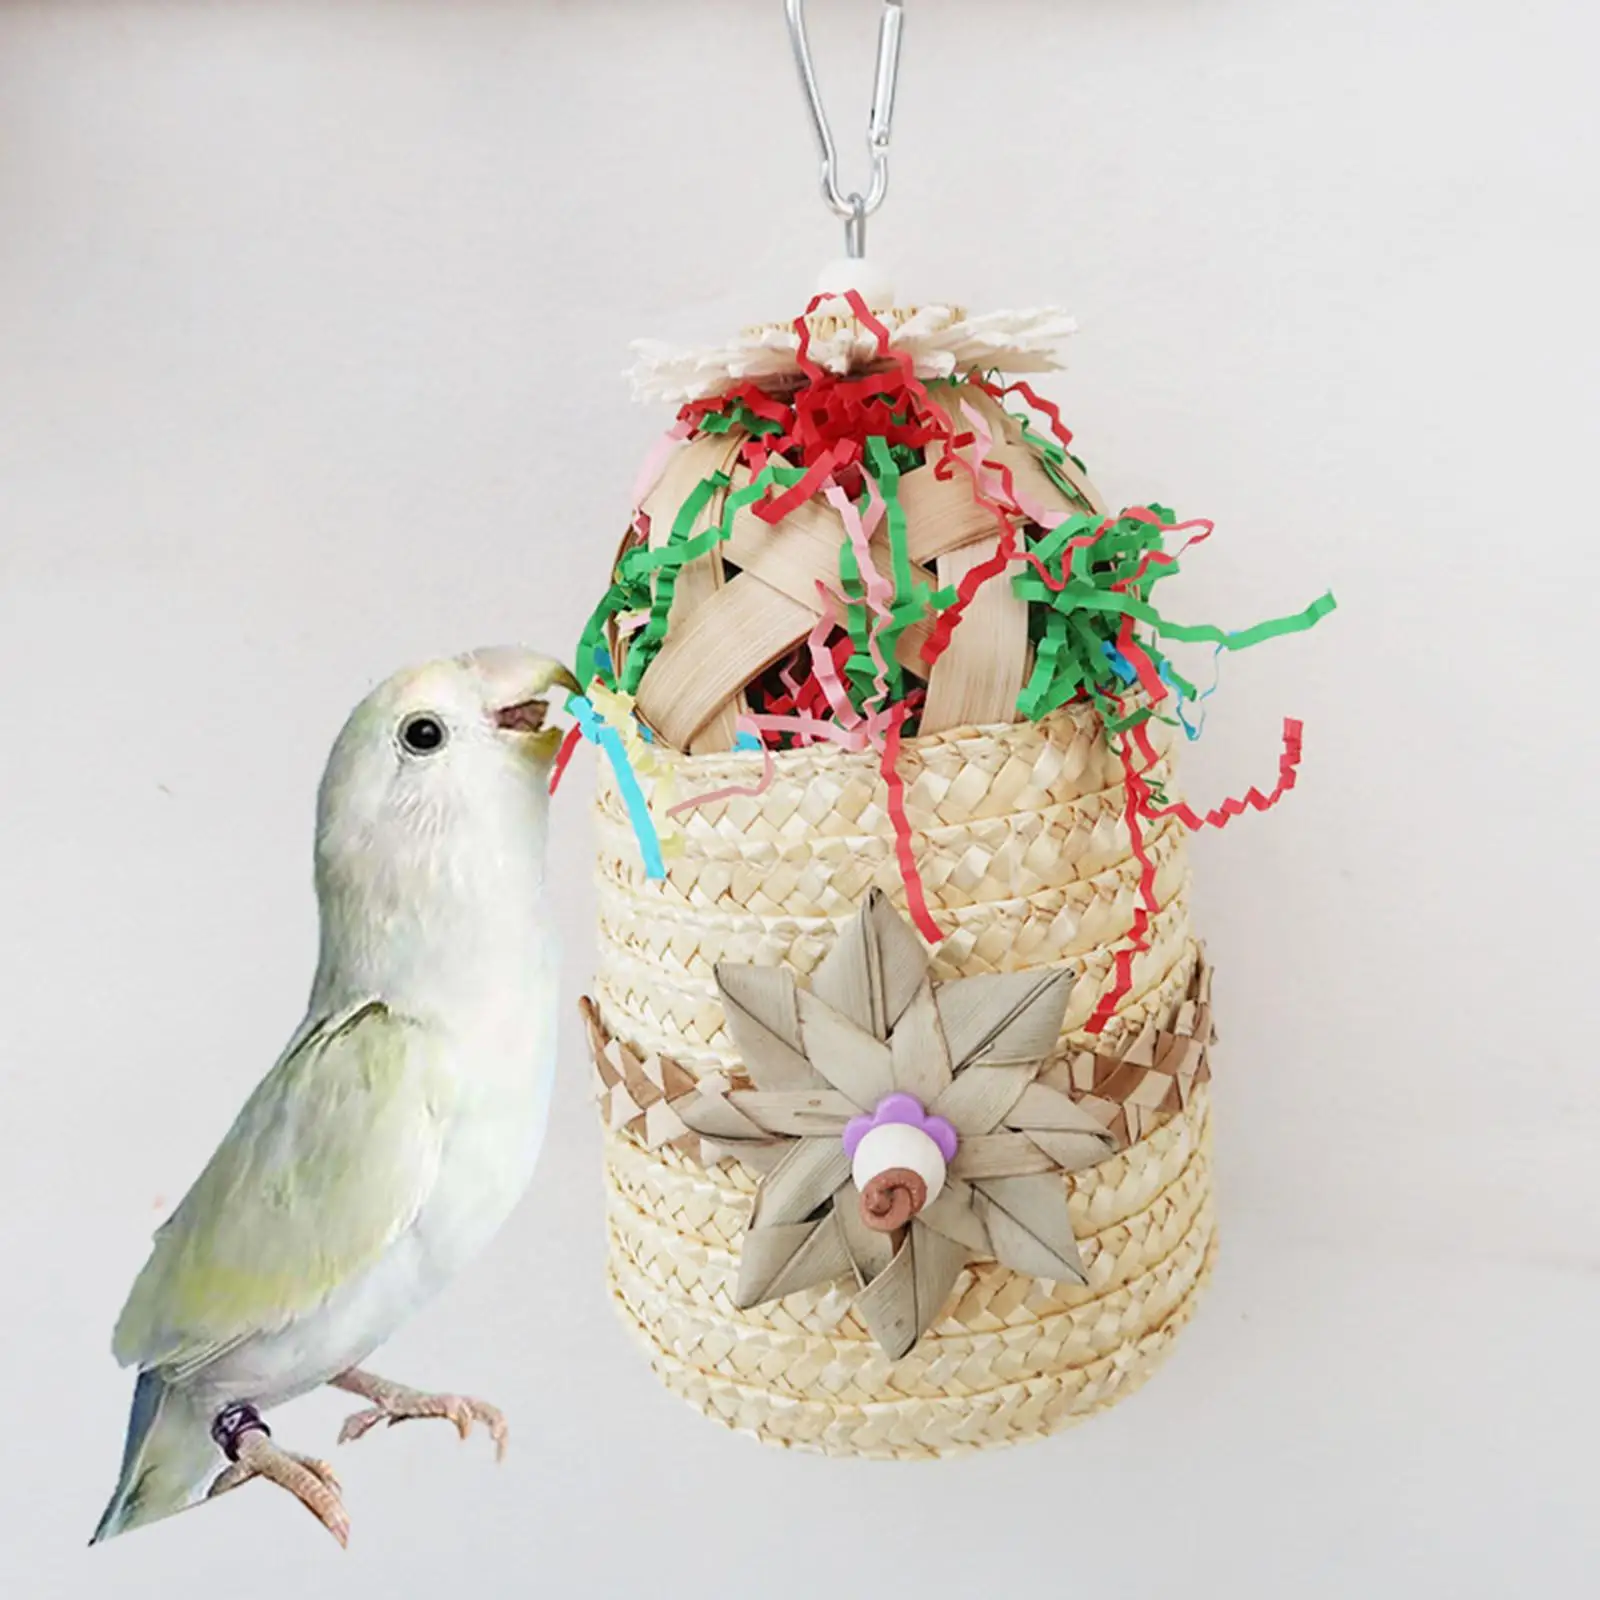 Bird Chewing Toy Decorative Funny Bird Parrot Toy for Macaw Finches Training